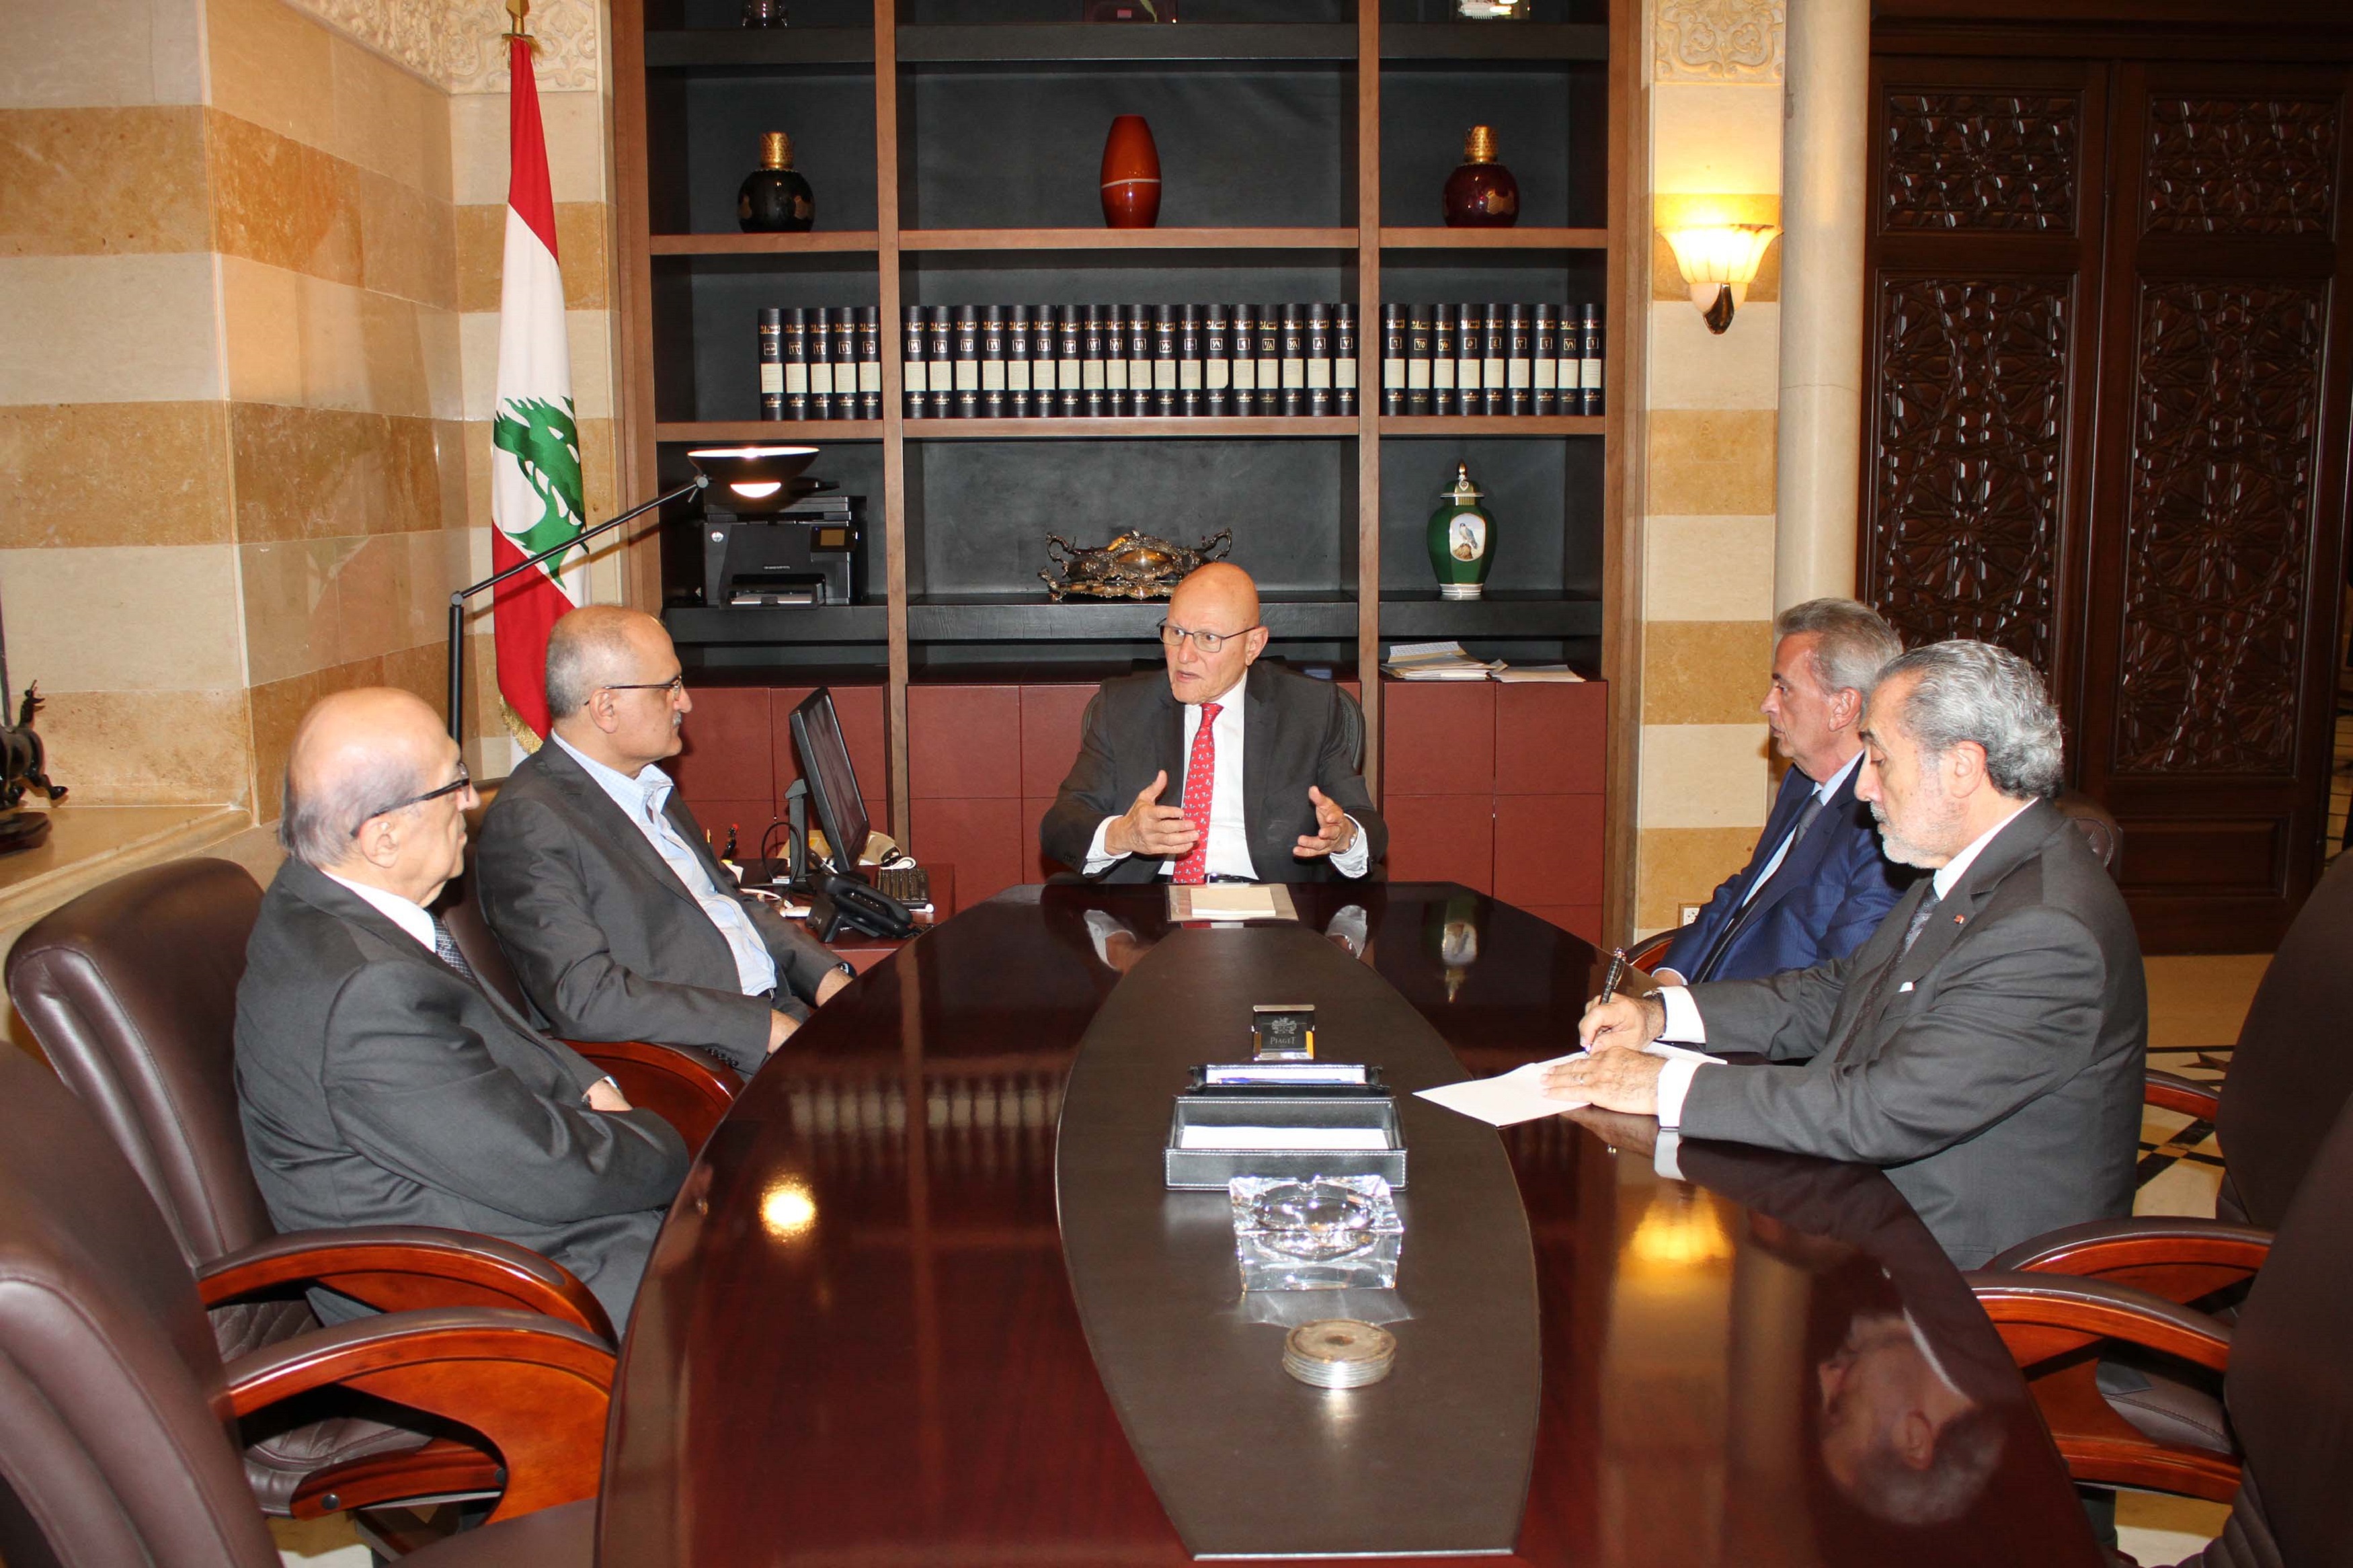 Lebanese Prime Minister Tammam Salam during the meeting with Finance Minister Ali Hassan Khalil, Governor of the Central Bank of Lebanon Riad Salameh and Chairman of the Association of Banks Joseph Tarabay